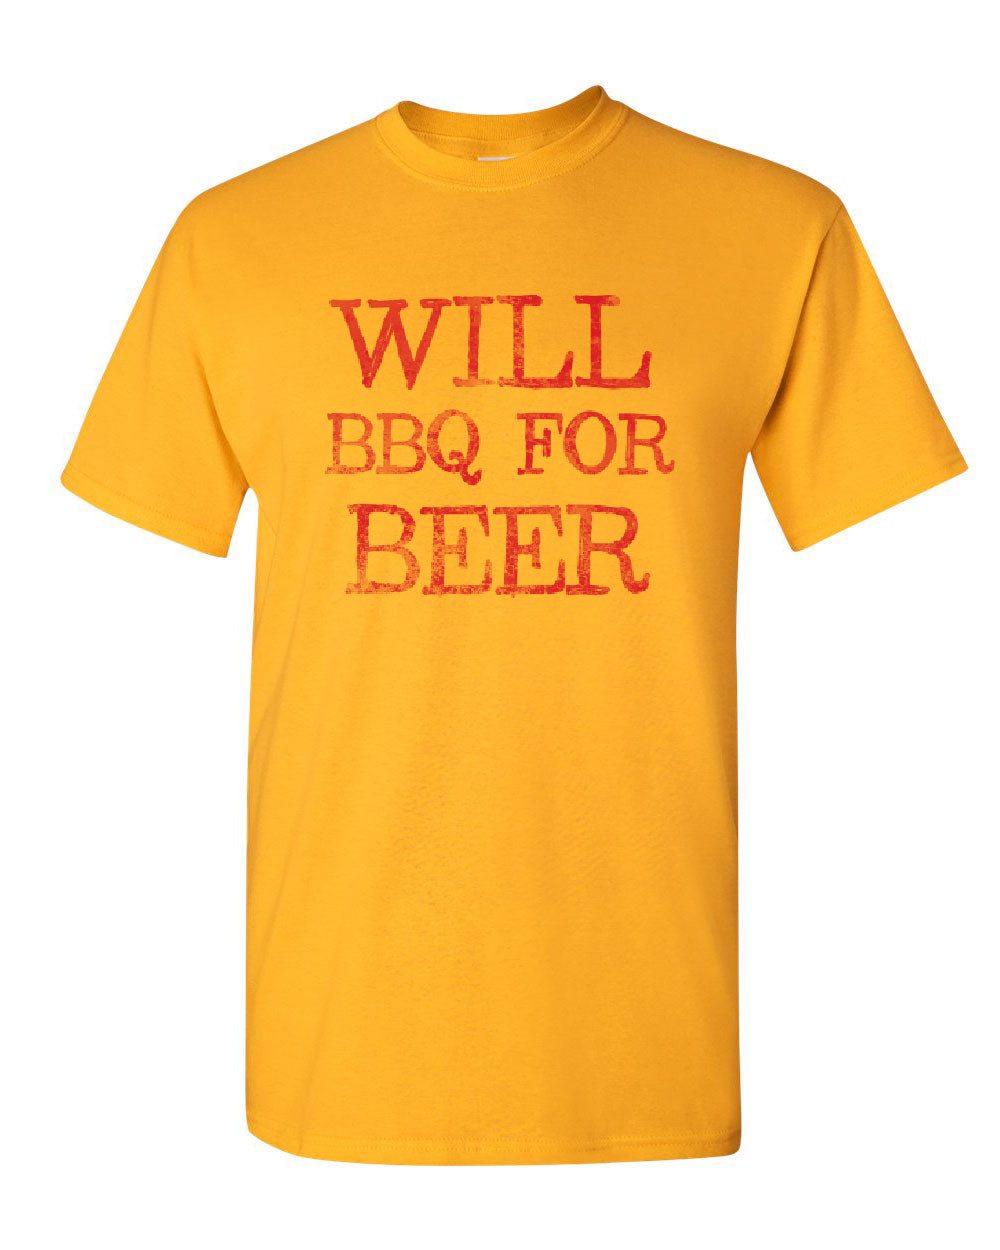 Will BBQ for Beer T-Shirt Funny Drinking Grilling Tee Shirt | eBay